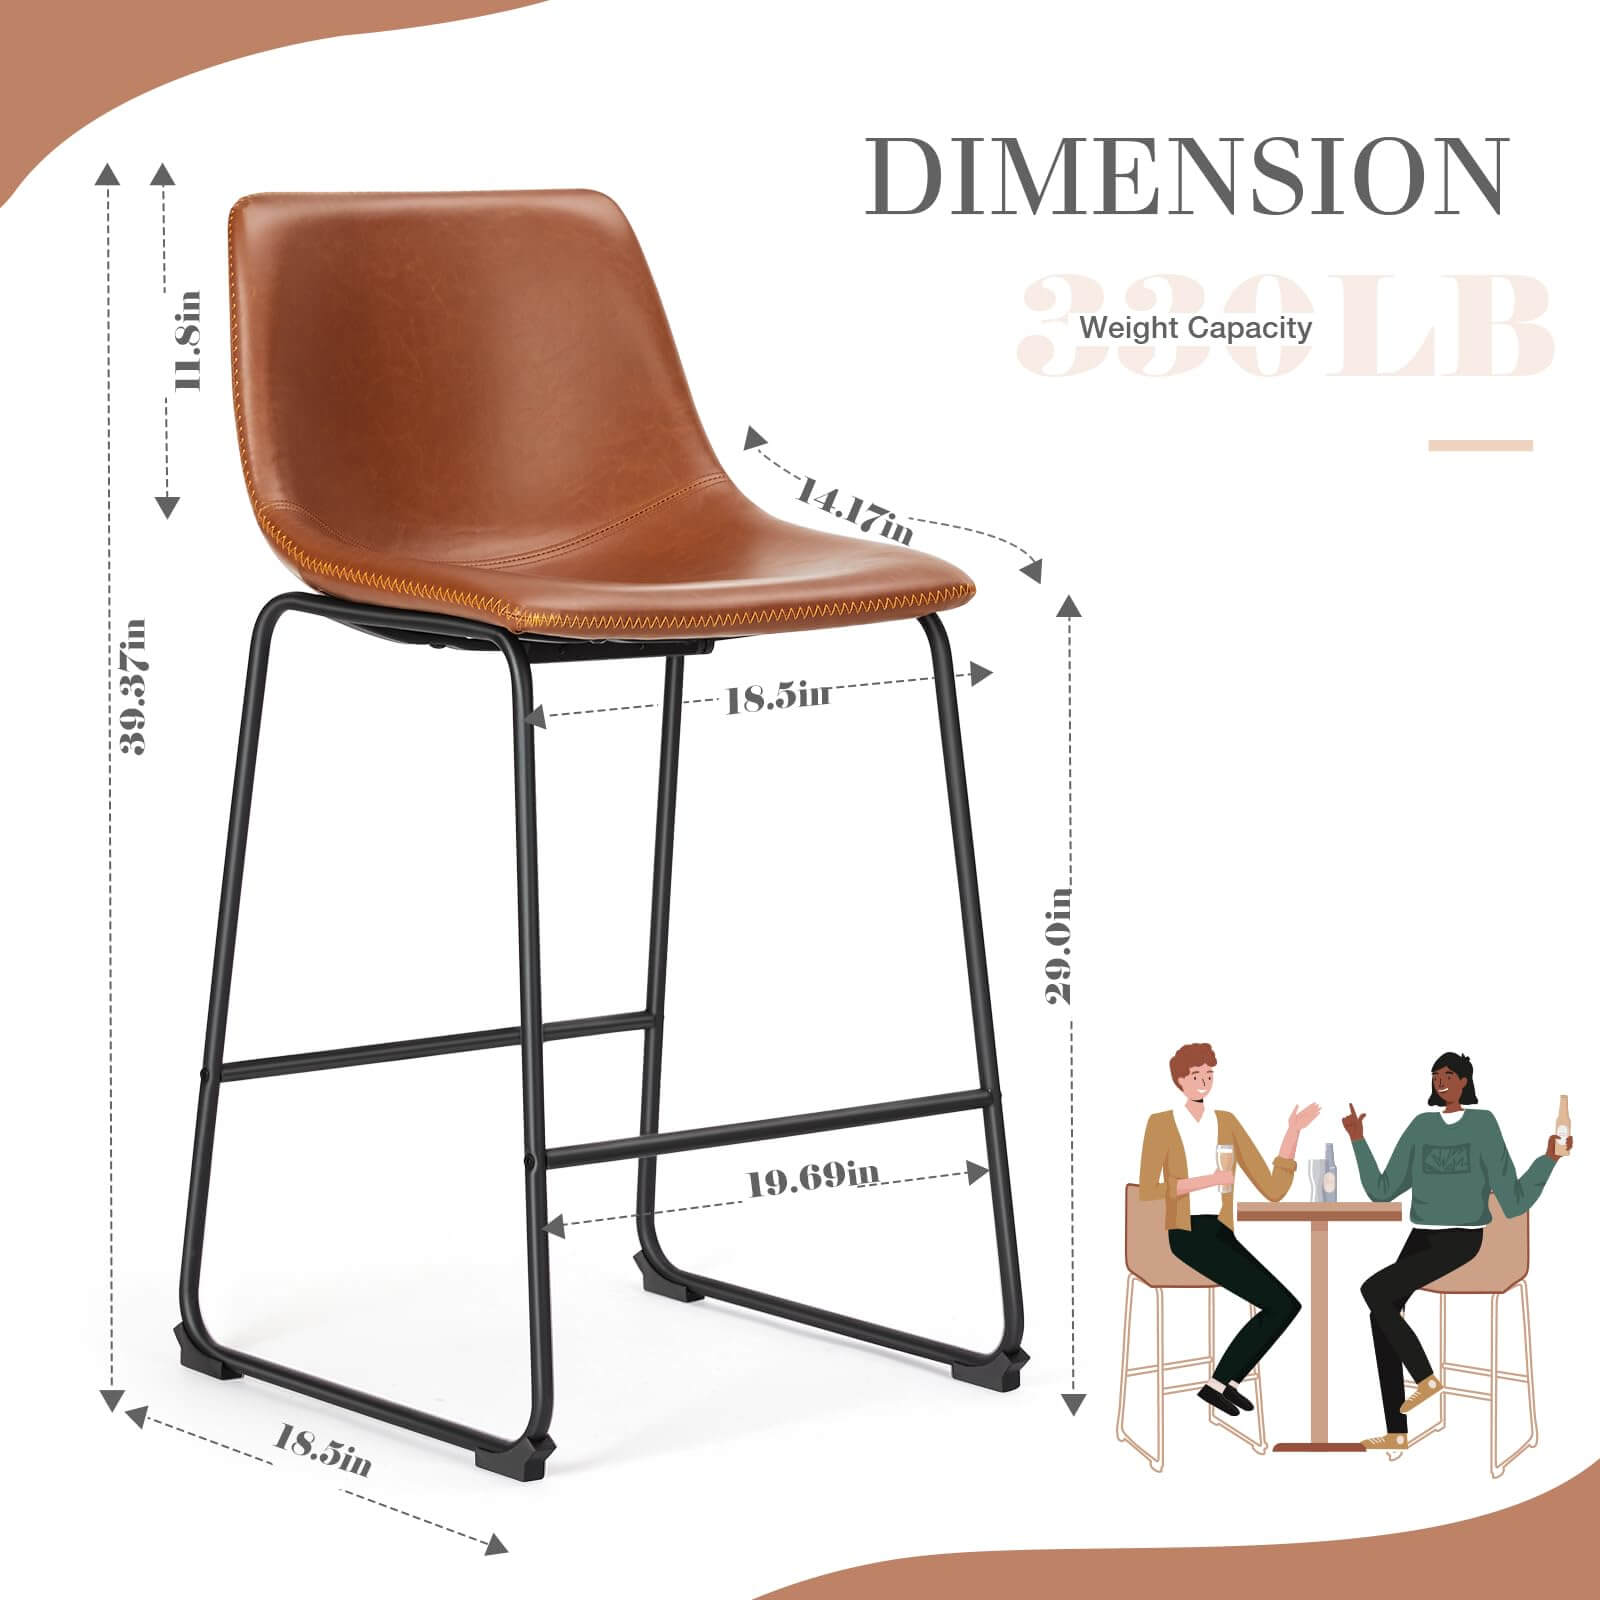 30-inch-dining-chairs#Color_Brown#Size_30 in